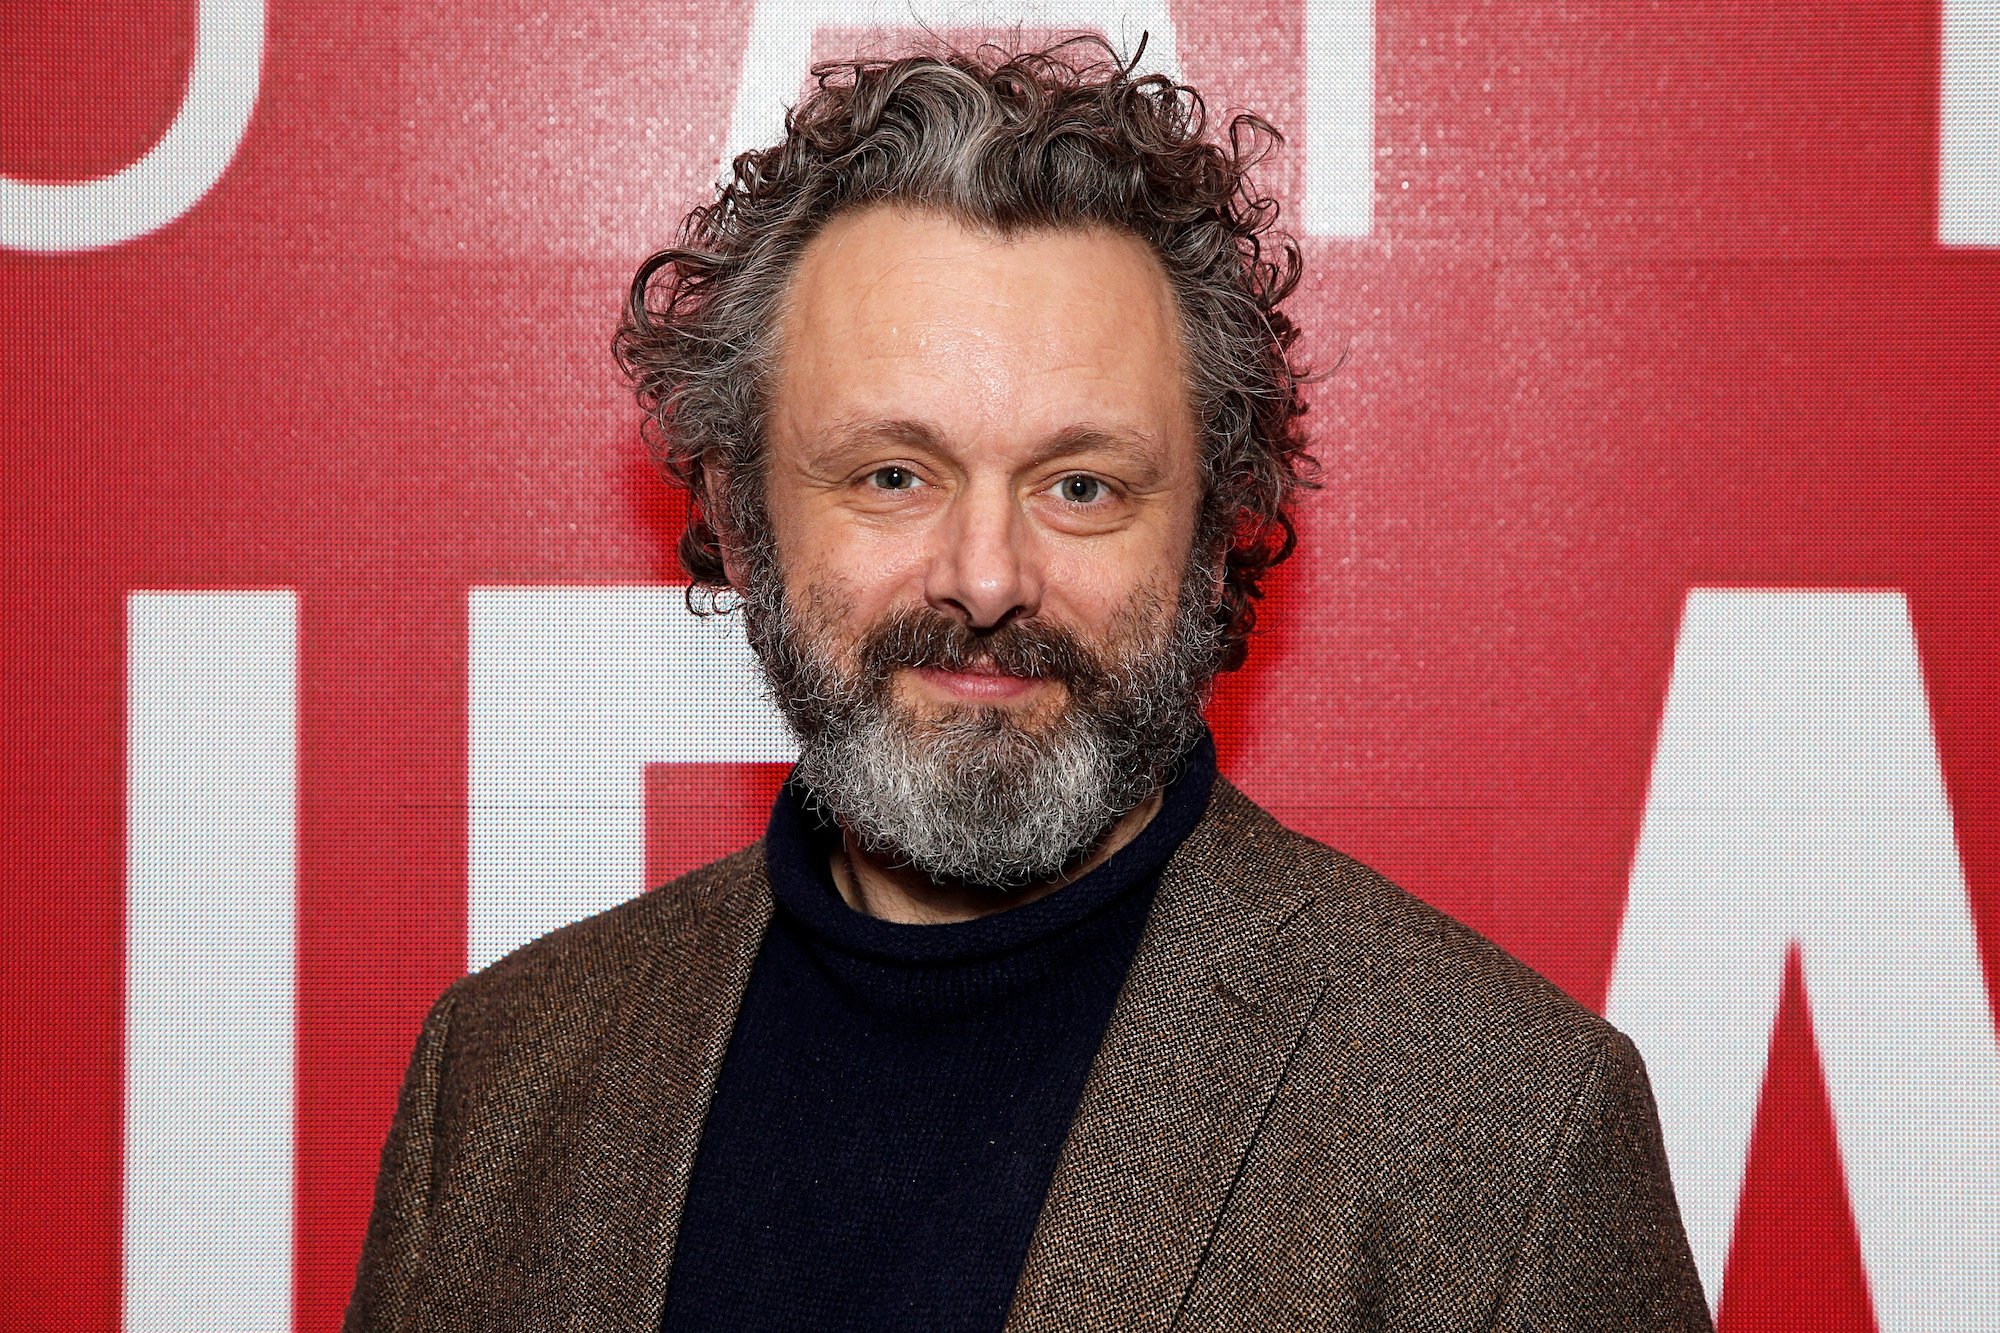 Michael Sheen smiling in front of a red background